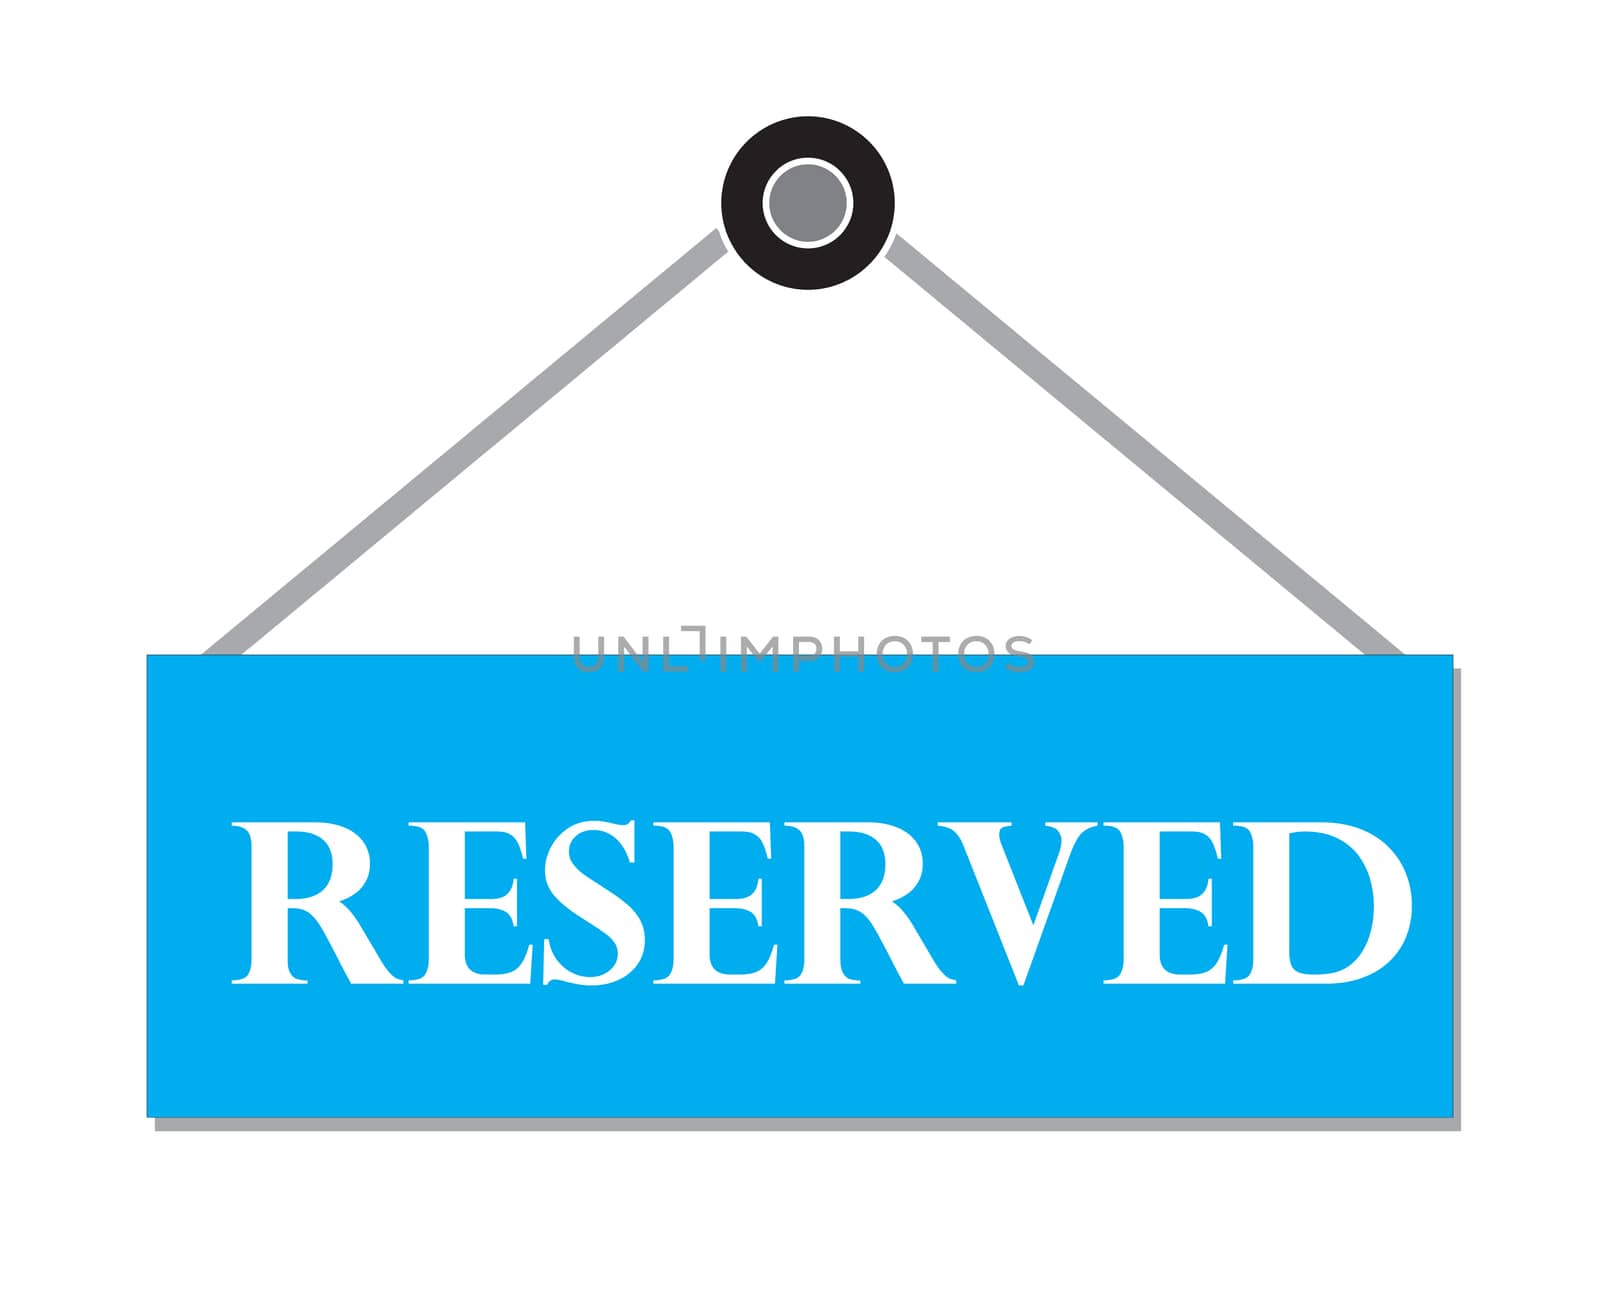 RESERVED sign. Booking badge.RESERVED label on white background.